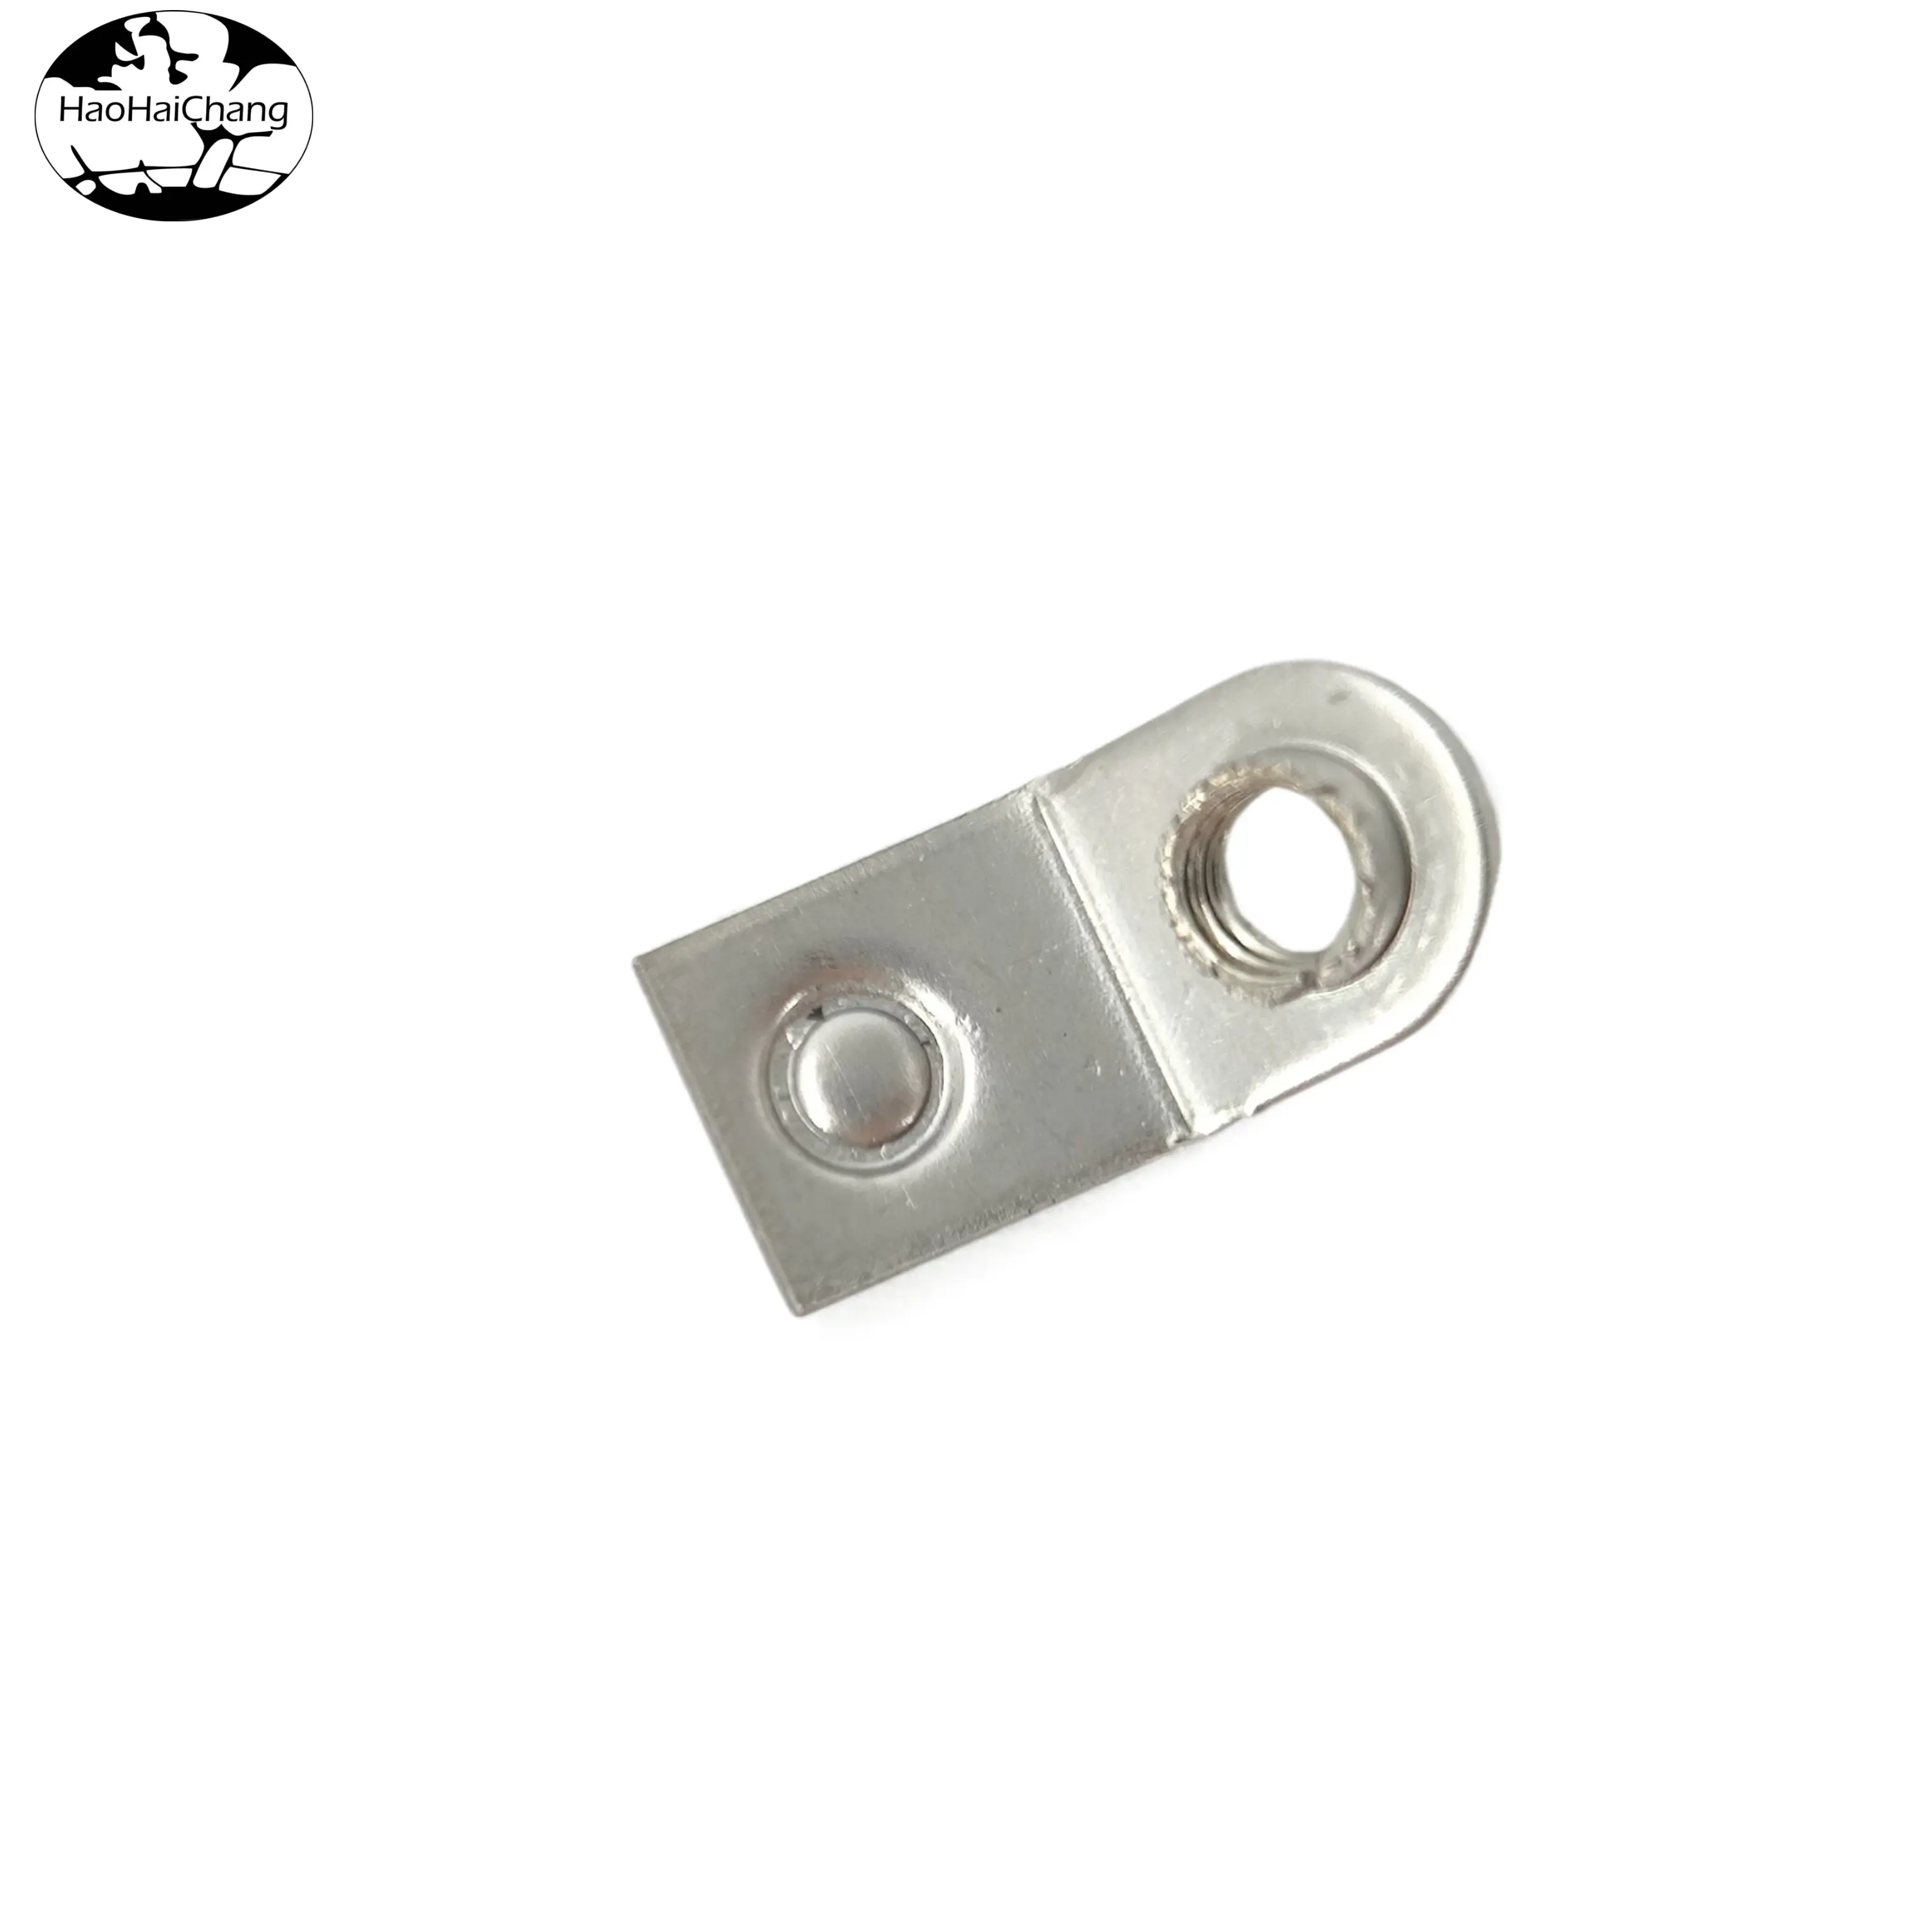 HHC-0297 Connector